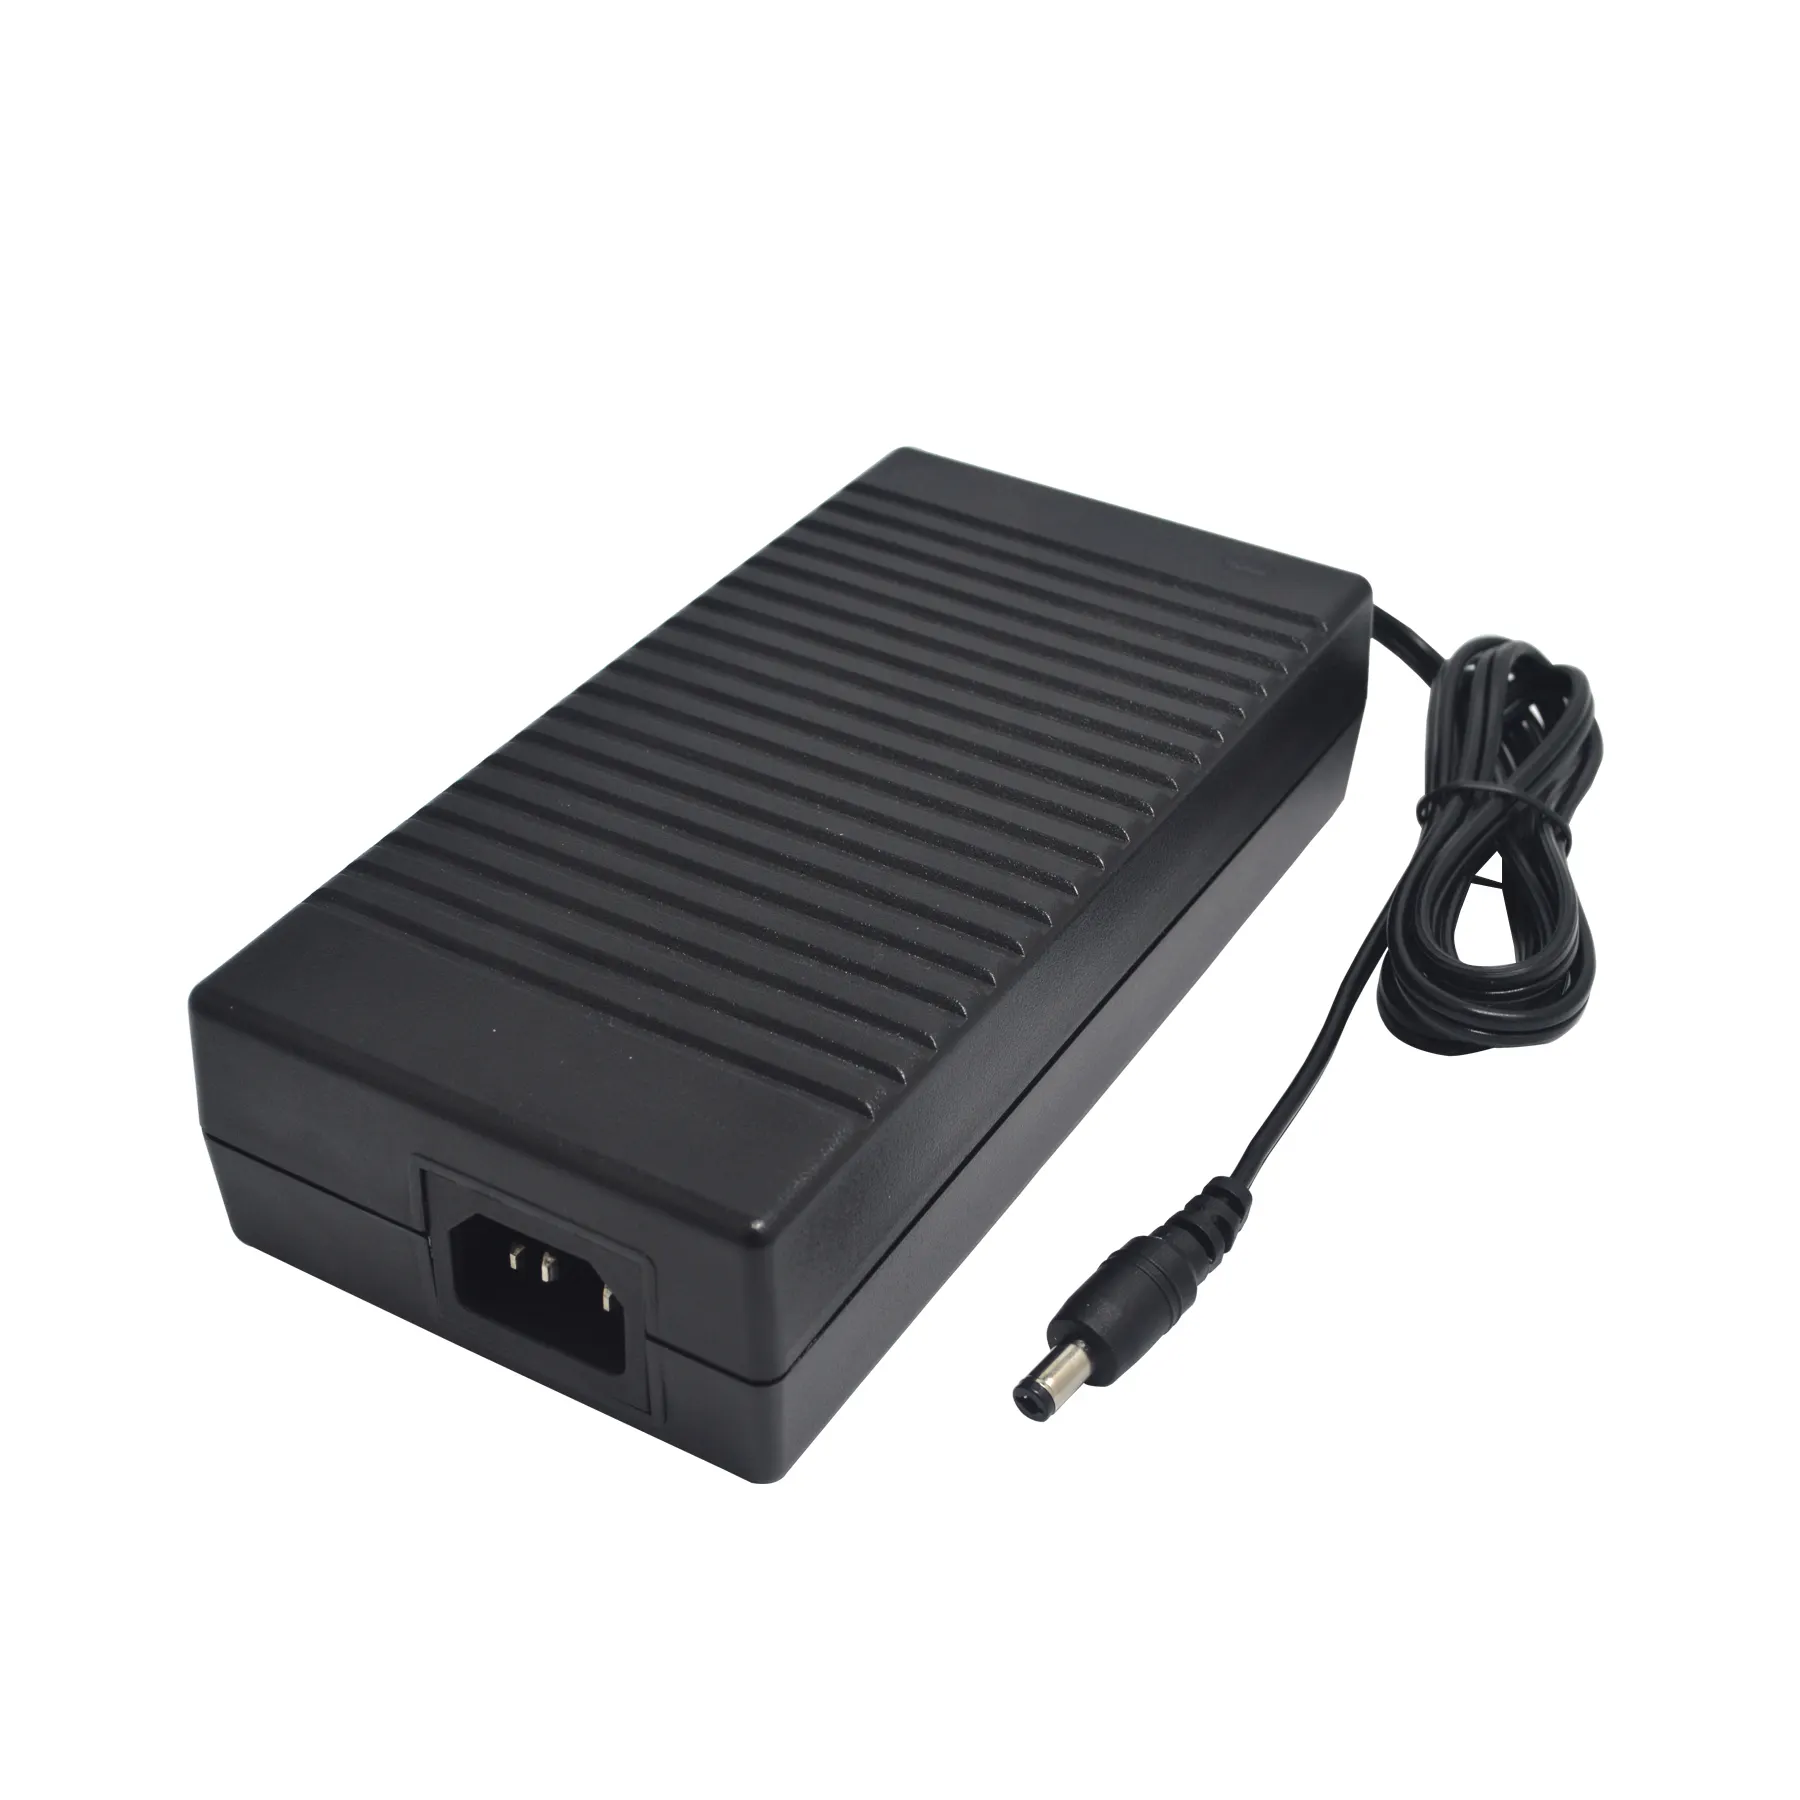 OEM 24V ac dc adaptor output and 27v desktop power adapter with 3 years warranty